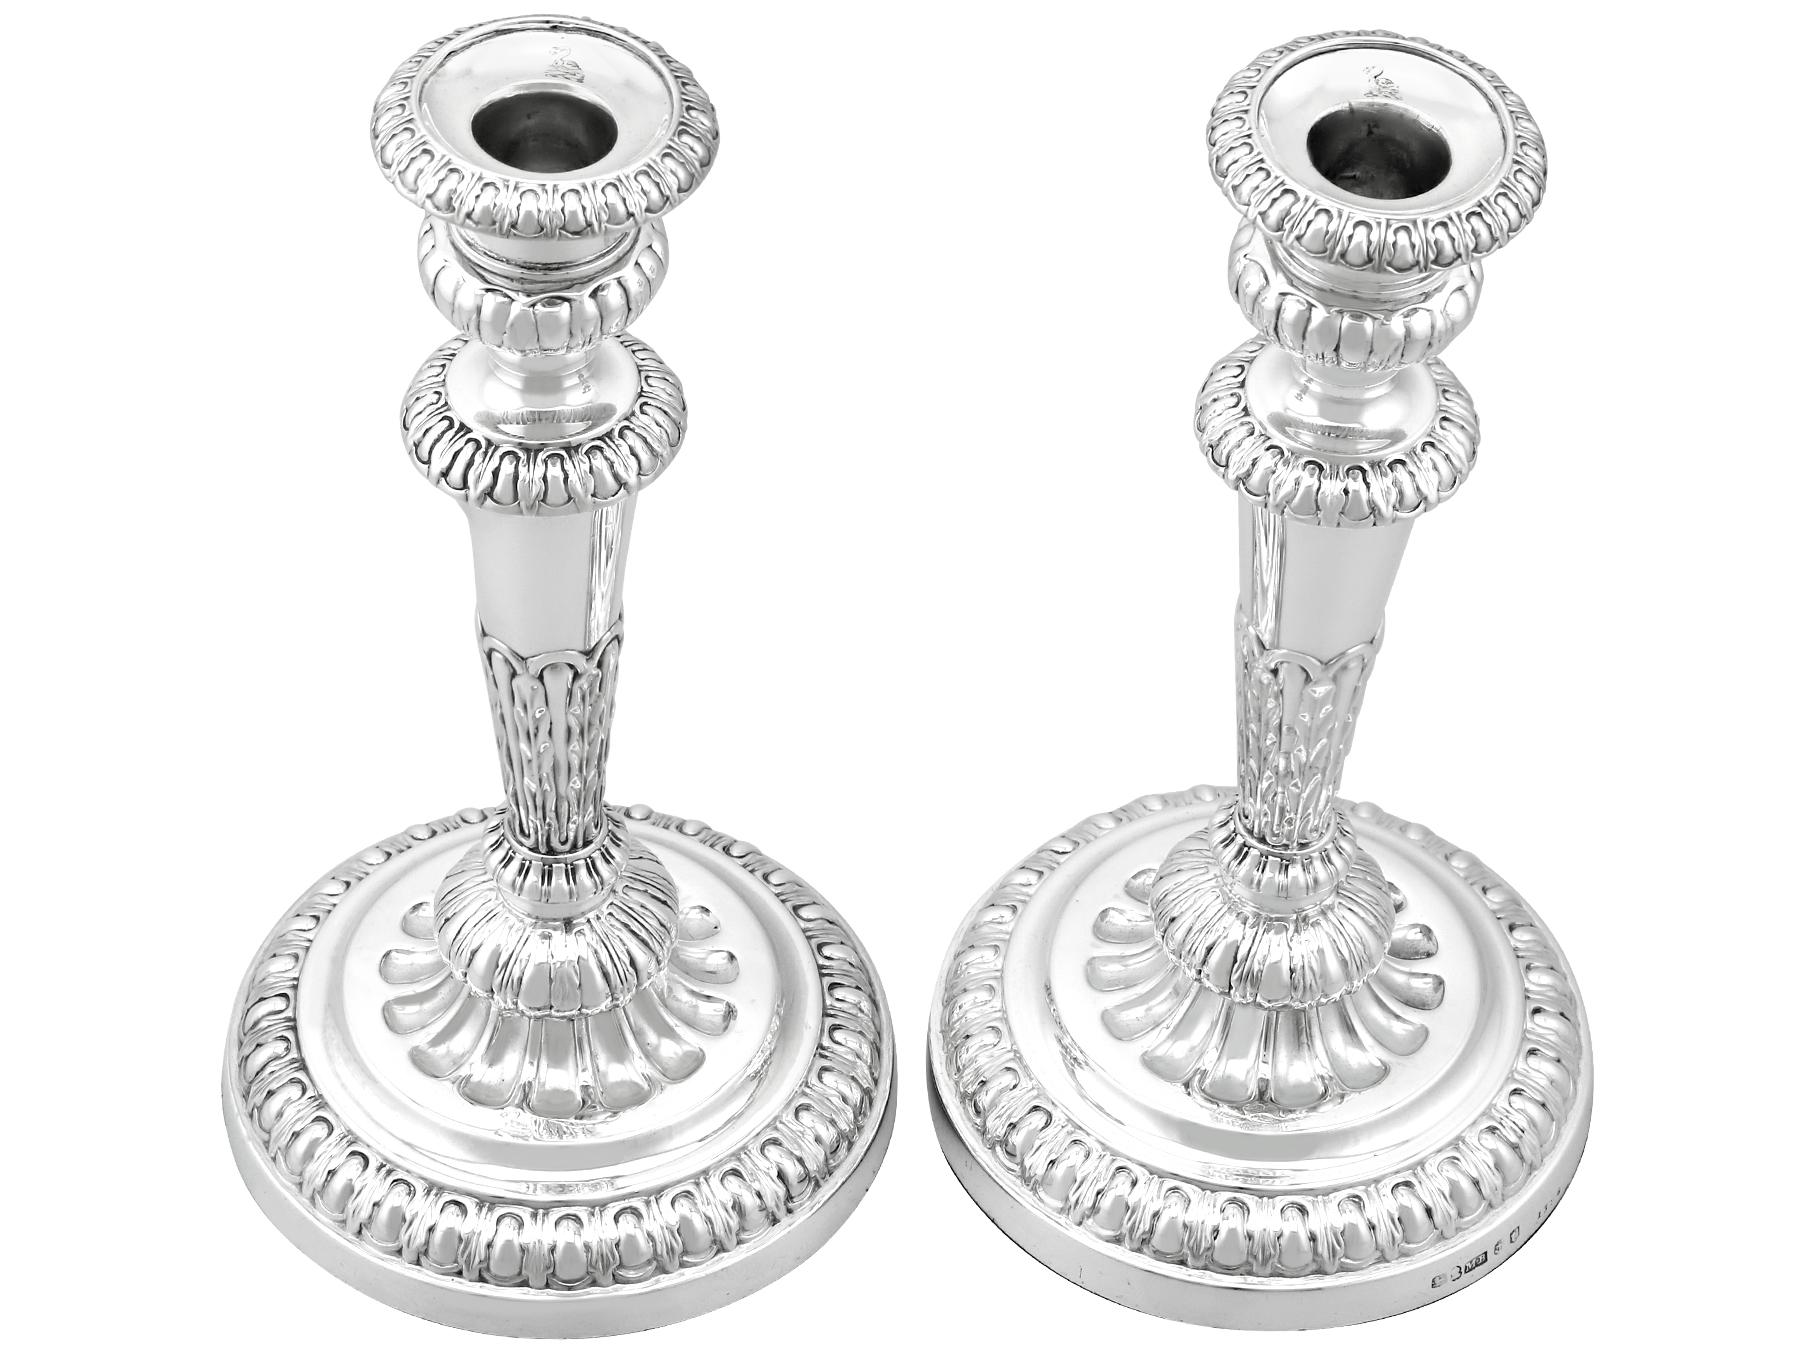 An exceptional, fine and impressive pair of antique George III English sterling silver candlesticks made by Matthew Boulton; part of our Georgian ornamental silverware collection.

These exceptional antique George III Matthew Boulton silver